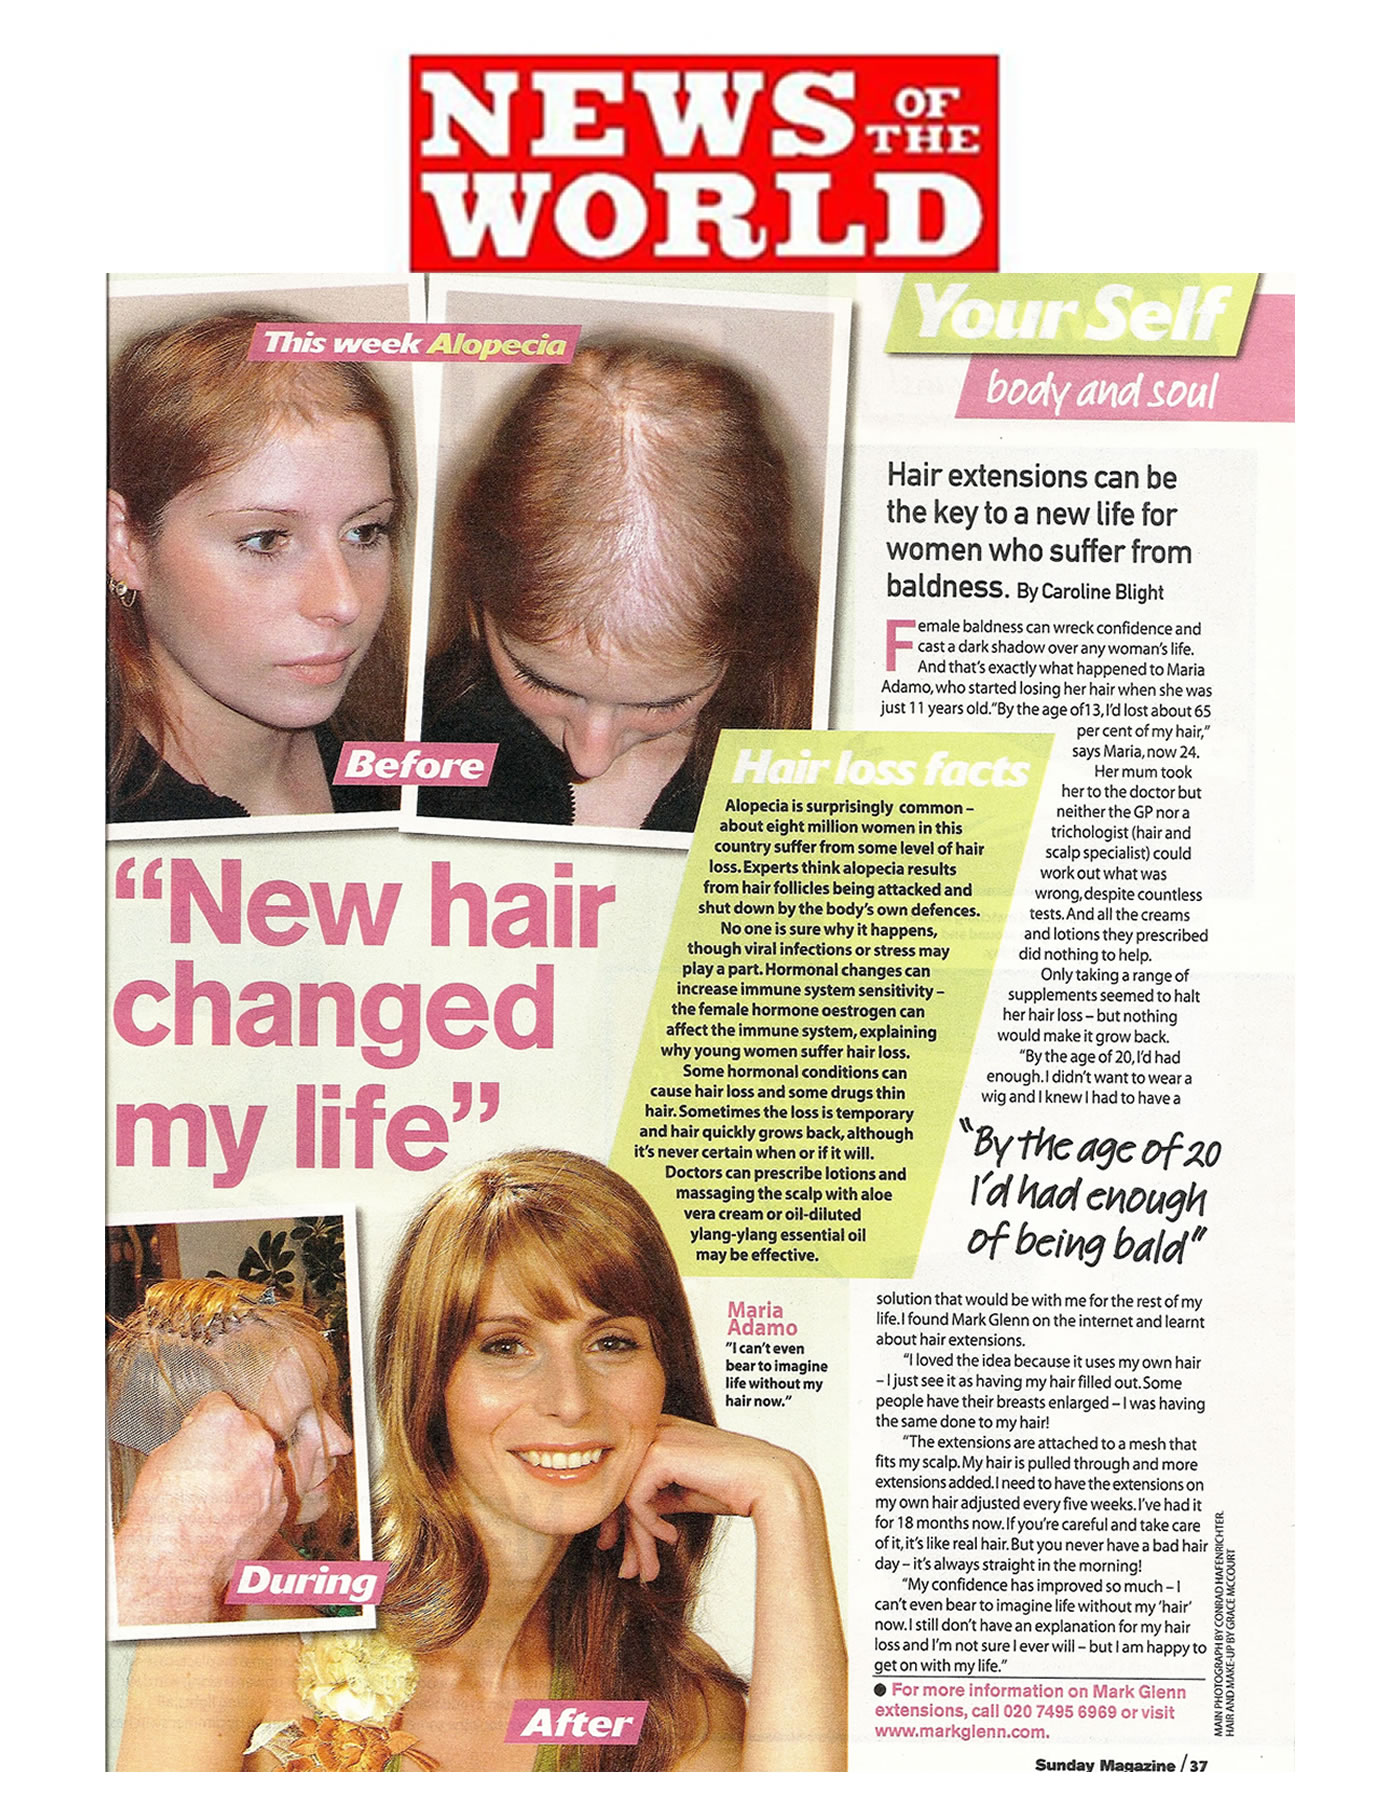 'New hair changed my life' - MG hair extensions for alopecia in News of the World